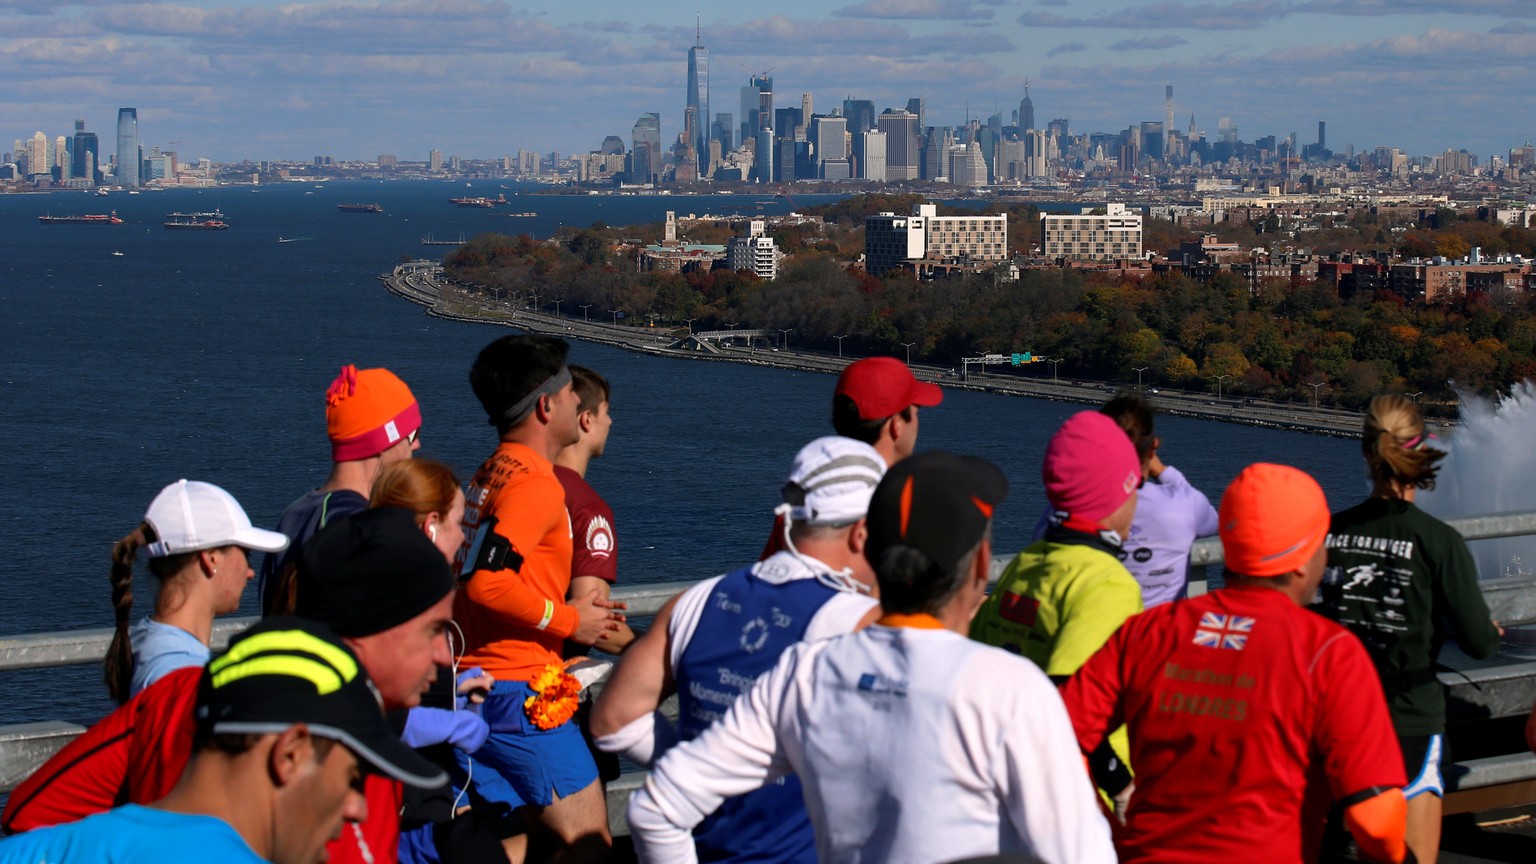 Manhattan is seen in the distance as runners cross the Verrazano–Narrows Bridge during the 2016 New York City Marathon in the Manhattan borough of New York City, NY, U.S. November 6, 2016. REUTERS/Bre ...